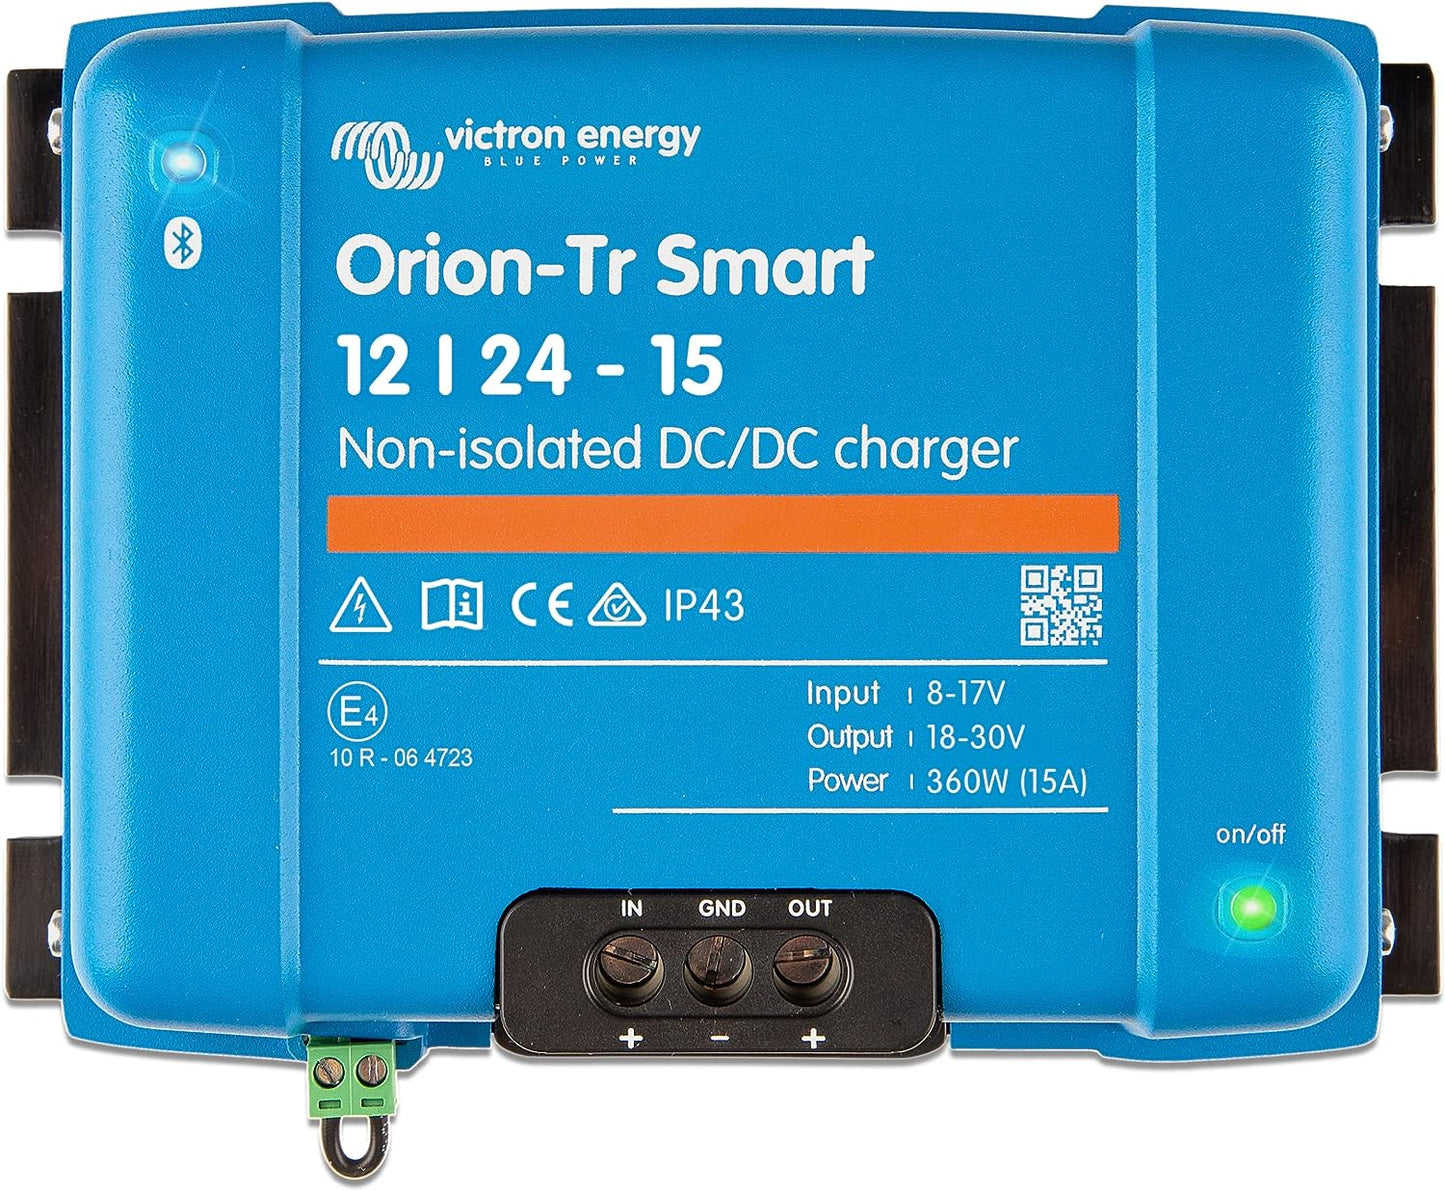 DC-DC 12V-24V Victron Energy Orion-Tr Smart 12/24-15A Non-isolated